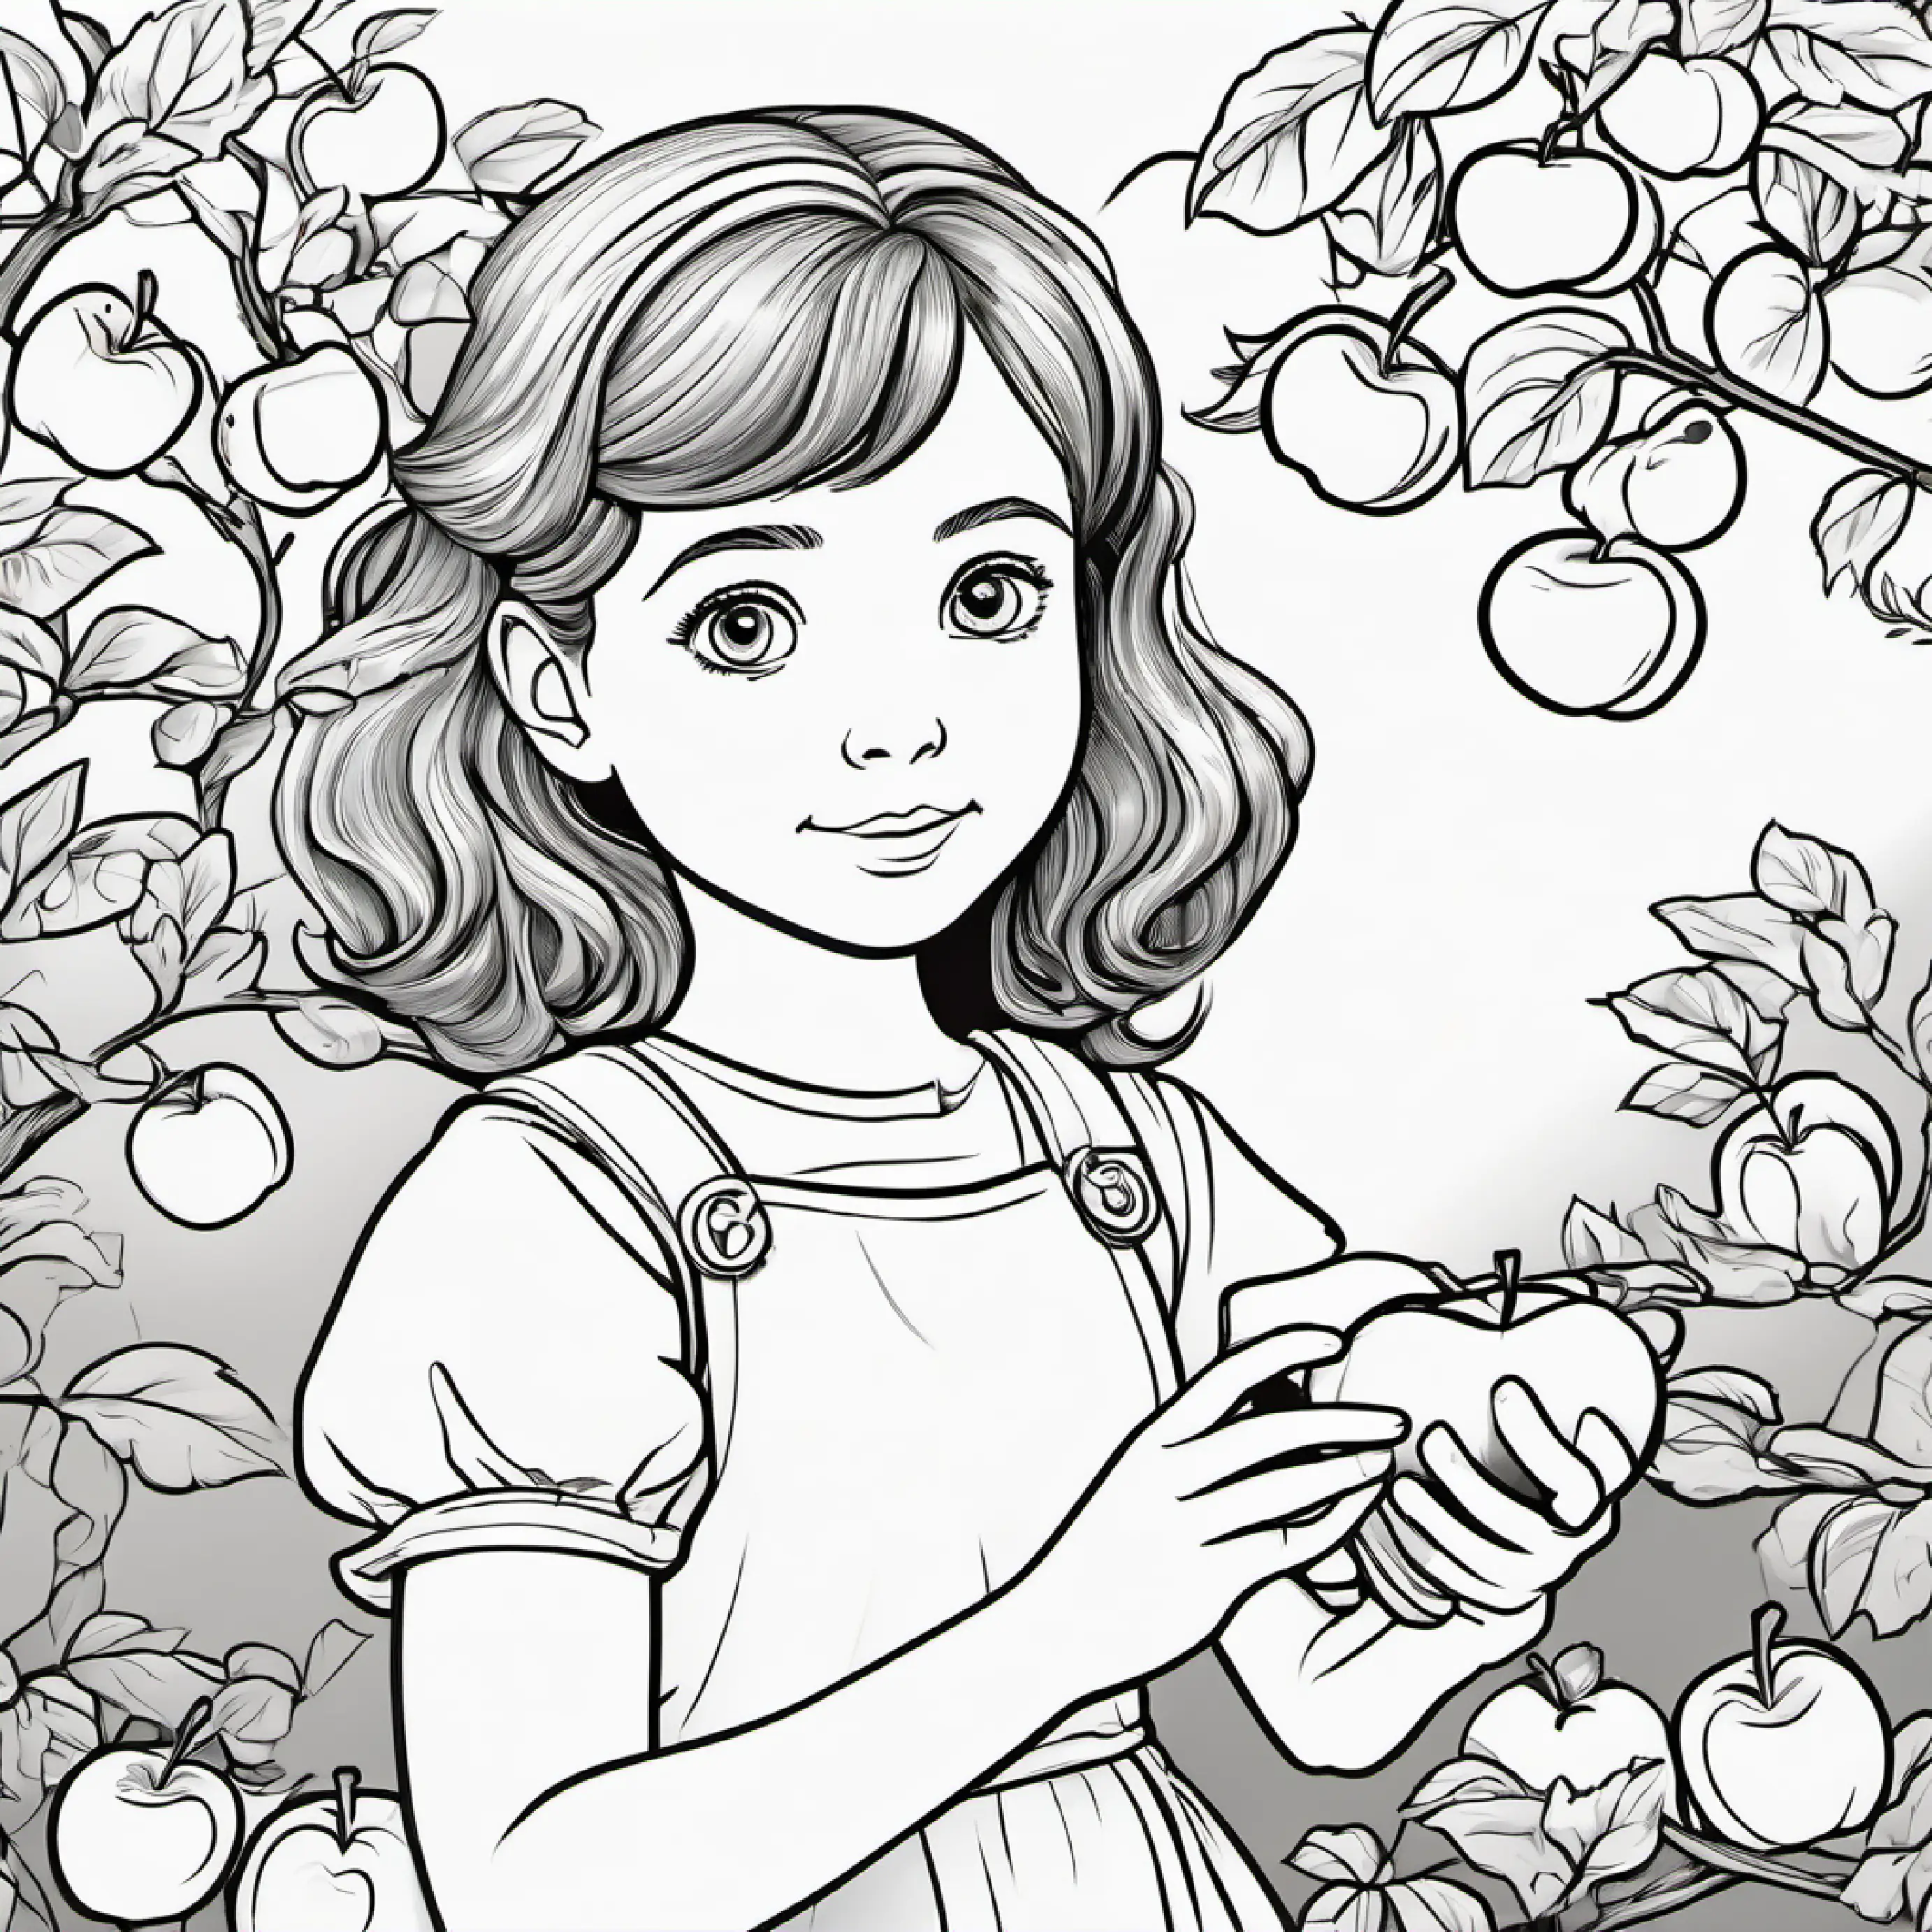 Apple tree prompts Young girl with brown hair and bright blue eyes to count apples.